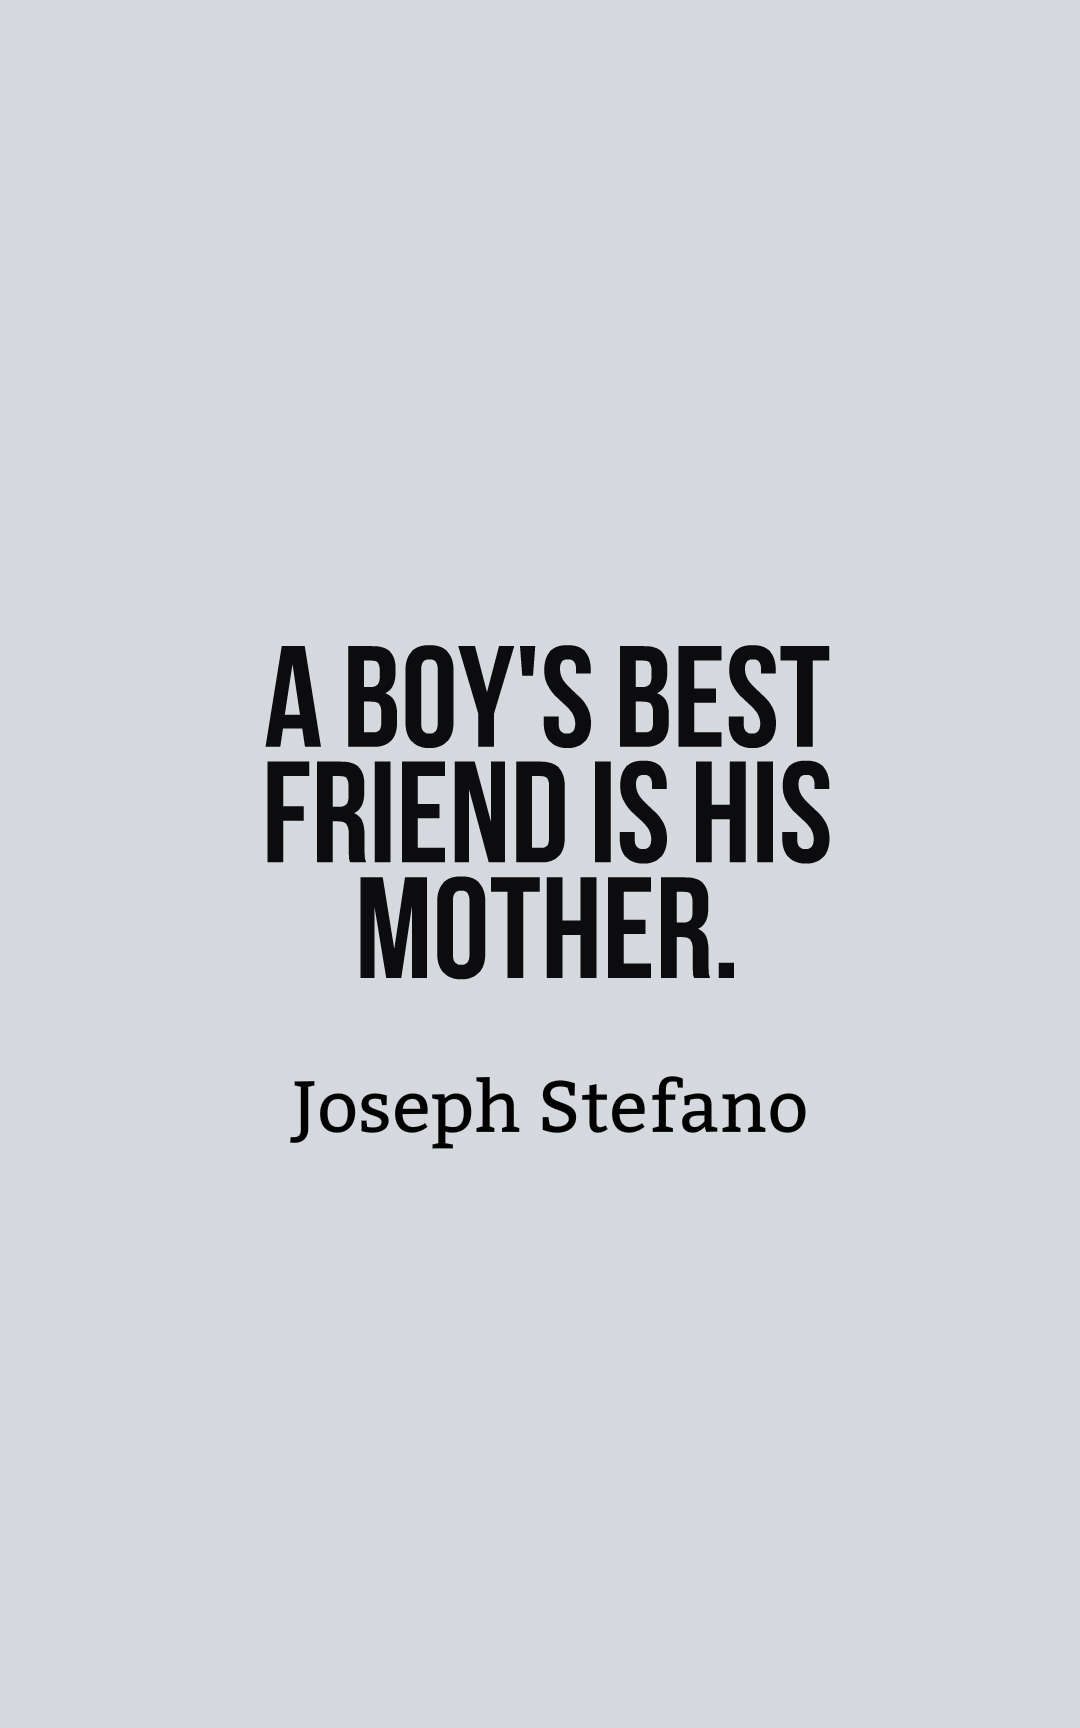 A boy's best friend is his mother.